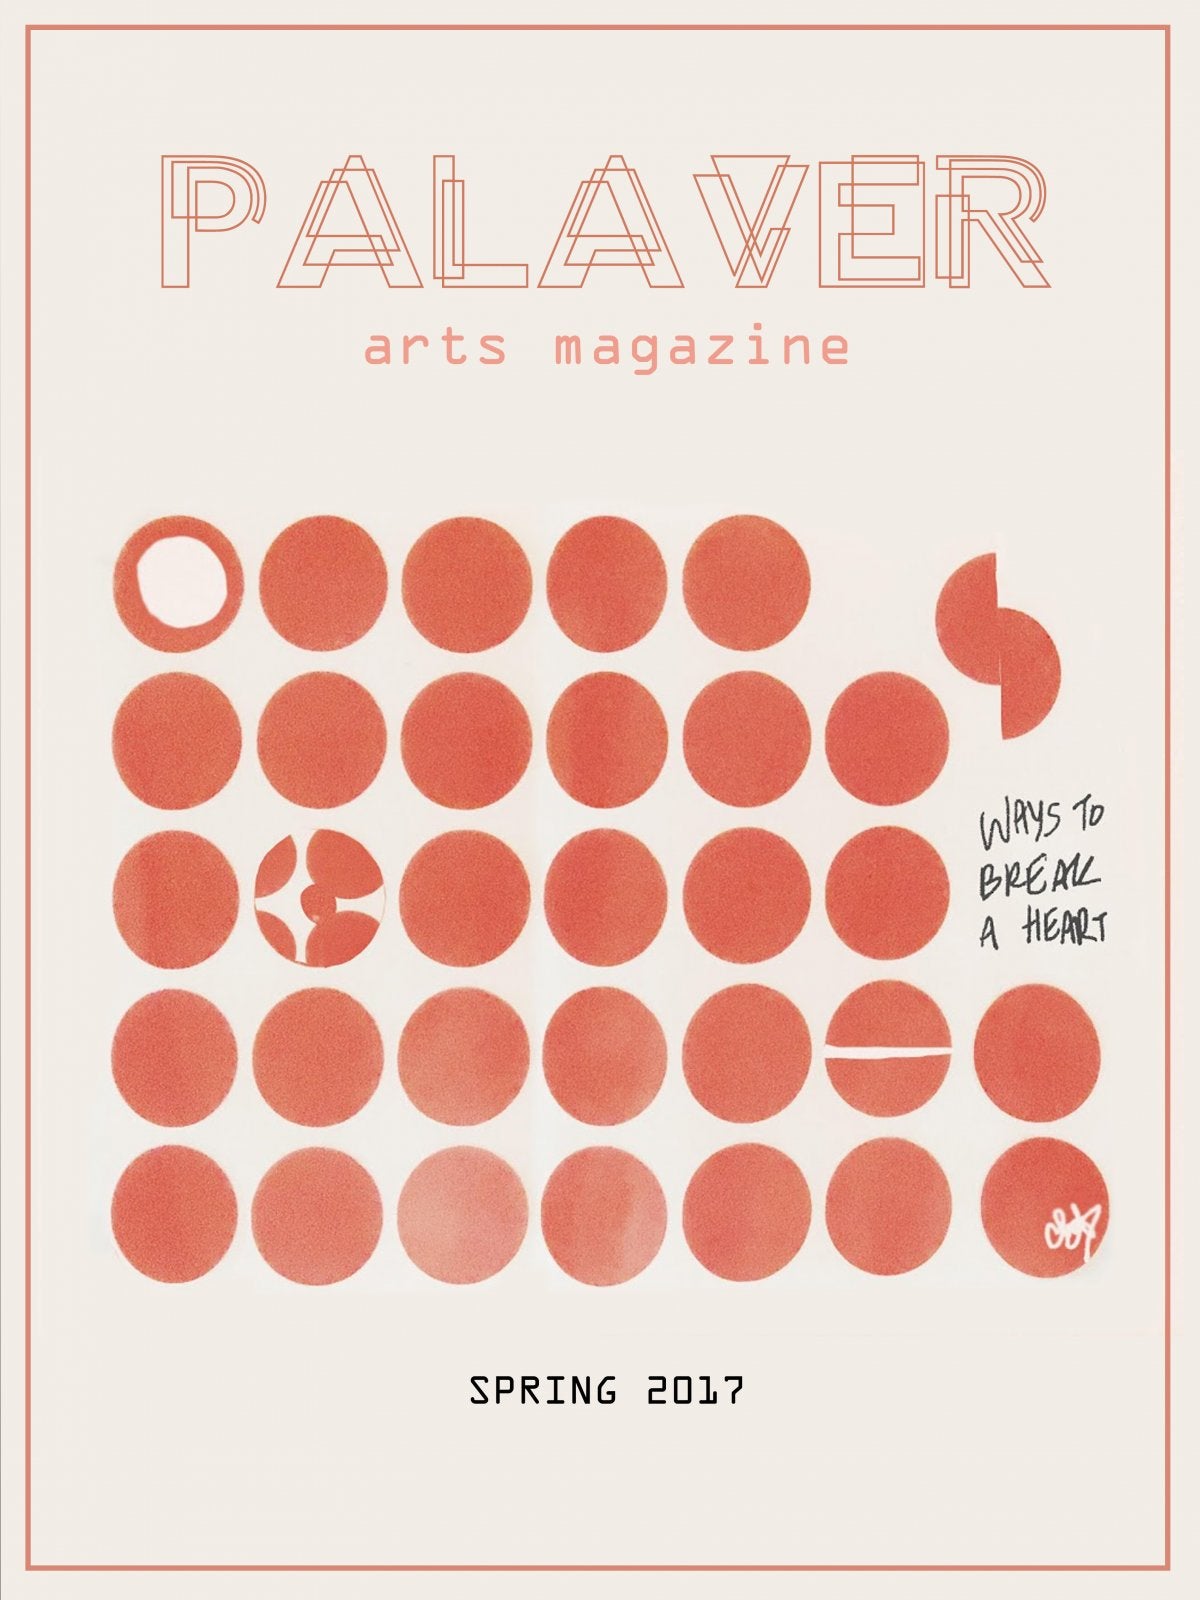 Palaver Arts Magazine, Spring 2017 Cover. Orange circles on beige background with text "WAYS TO BREAK A HEART" on middle right.